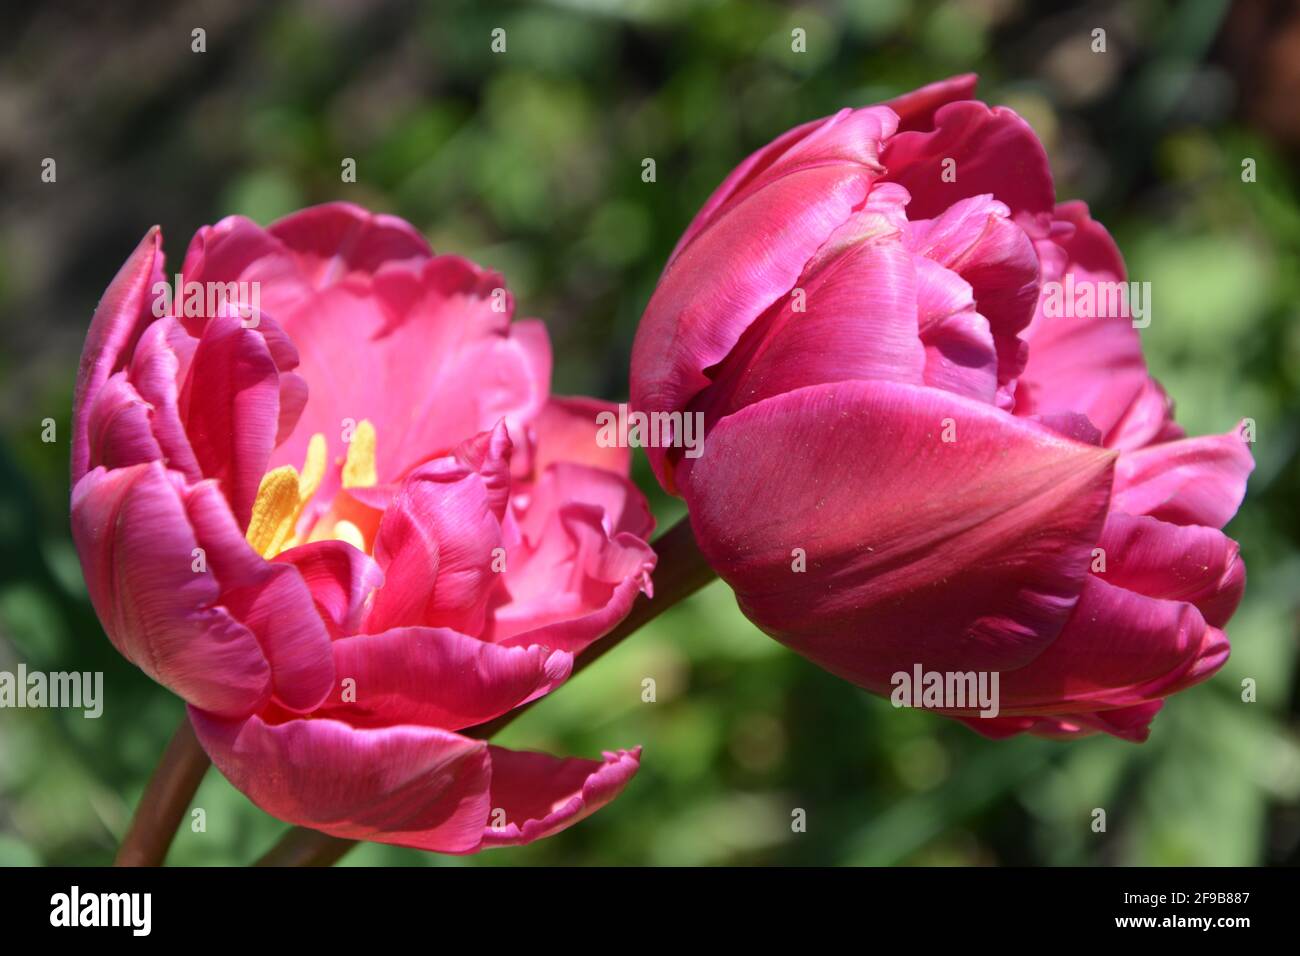 Tulip Red Princess High Resolution, Red tulips with rose petals, bright red tulips, close-up stock photo, DSLR Stock Photo